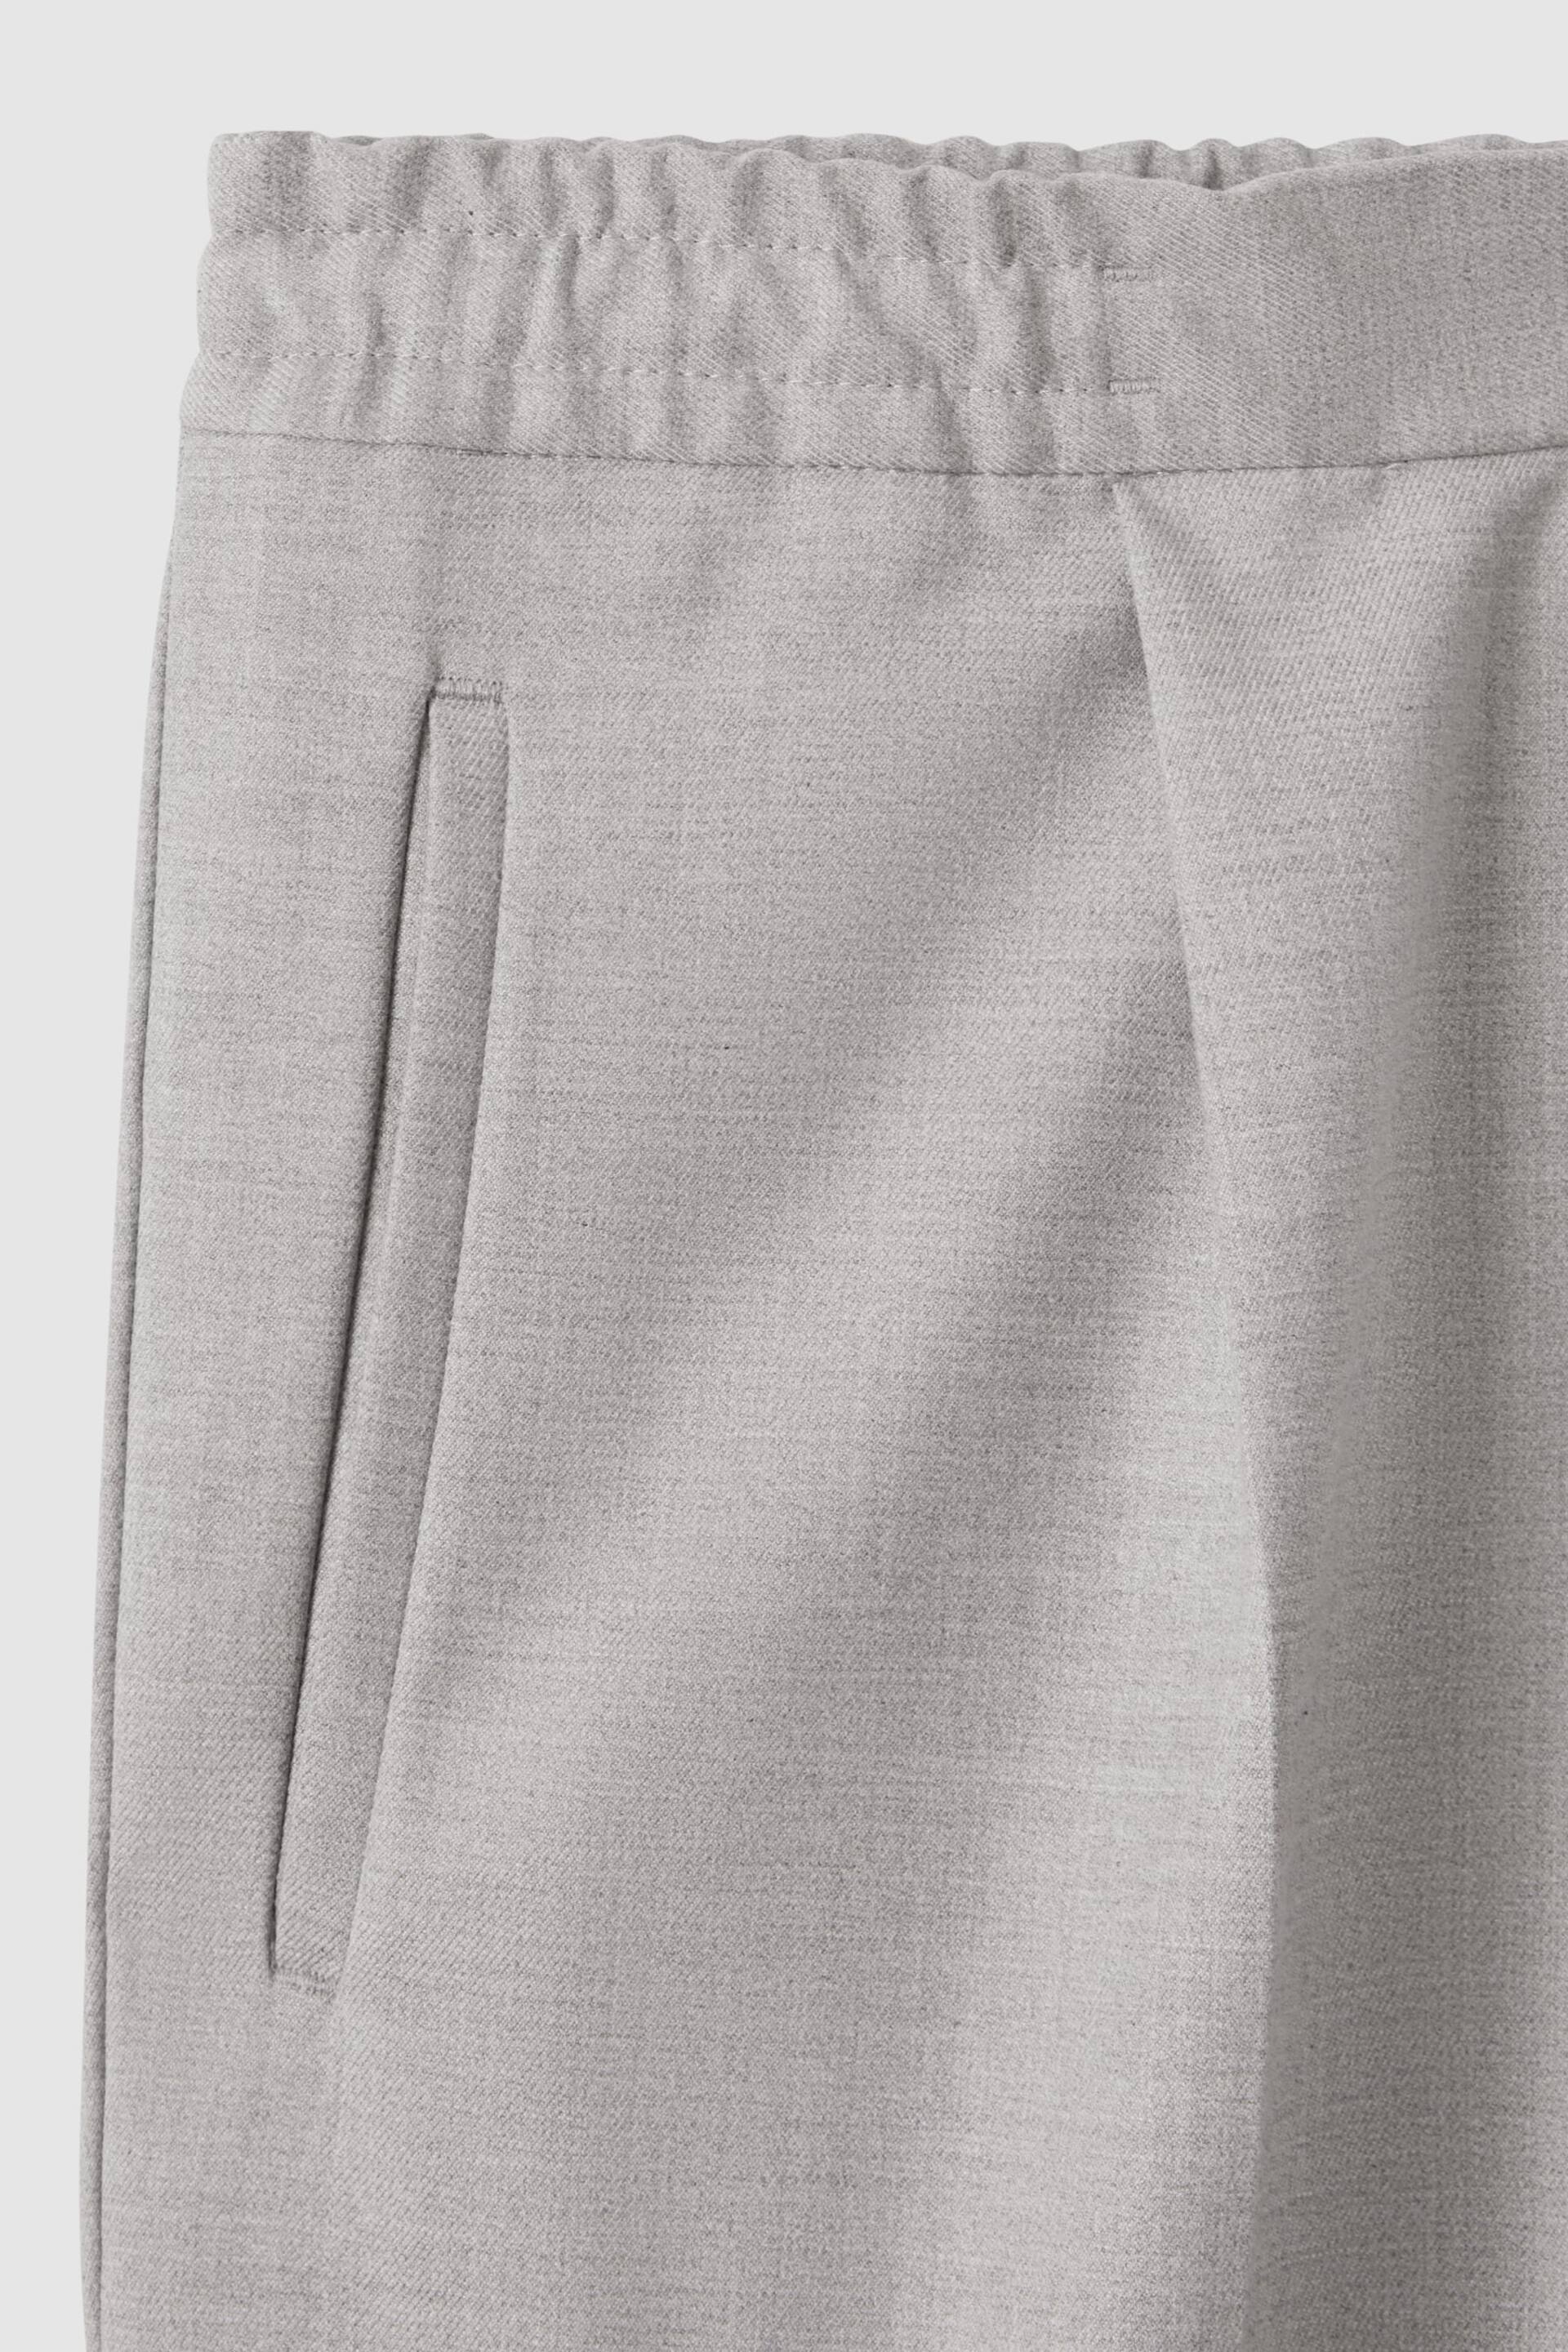 Reiss Grey Brighton Relaxed Drawstring Trousers with Turn-Ups - Image 5 of 6